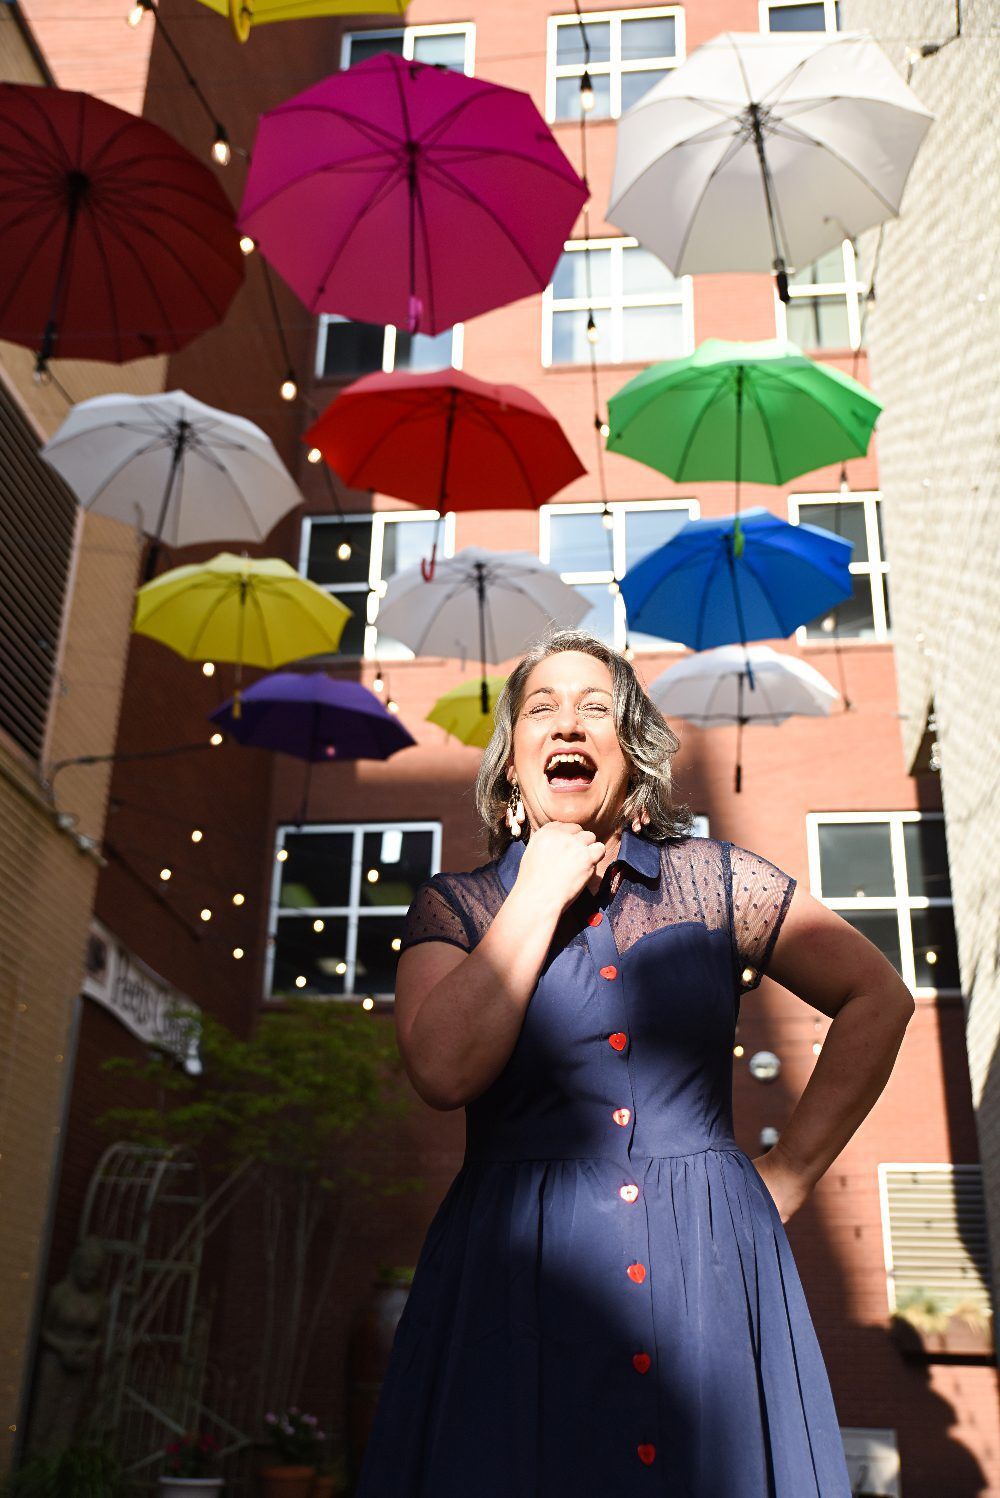 Over 50 Blogs in America - Chattanooga travel blogger Kathy Brown stands under a colorful umbrella canopy in a hip alley, wearing a blue retro dress with pink buttons and smiling with excitement in her eyes.